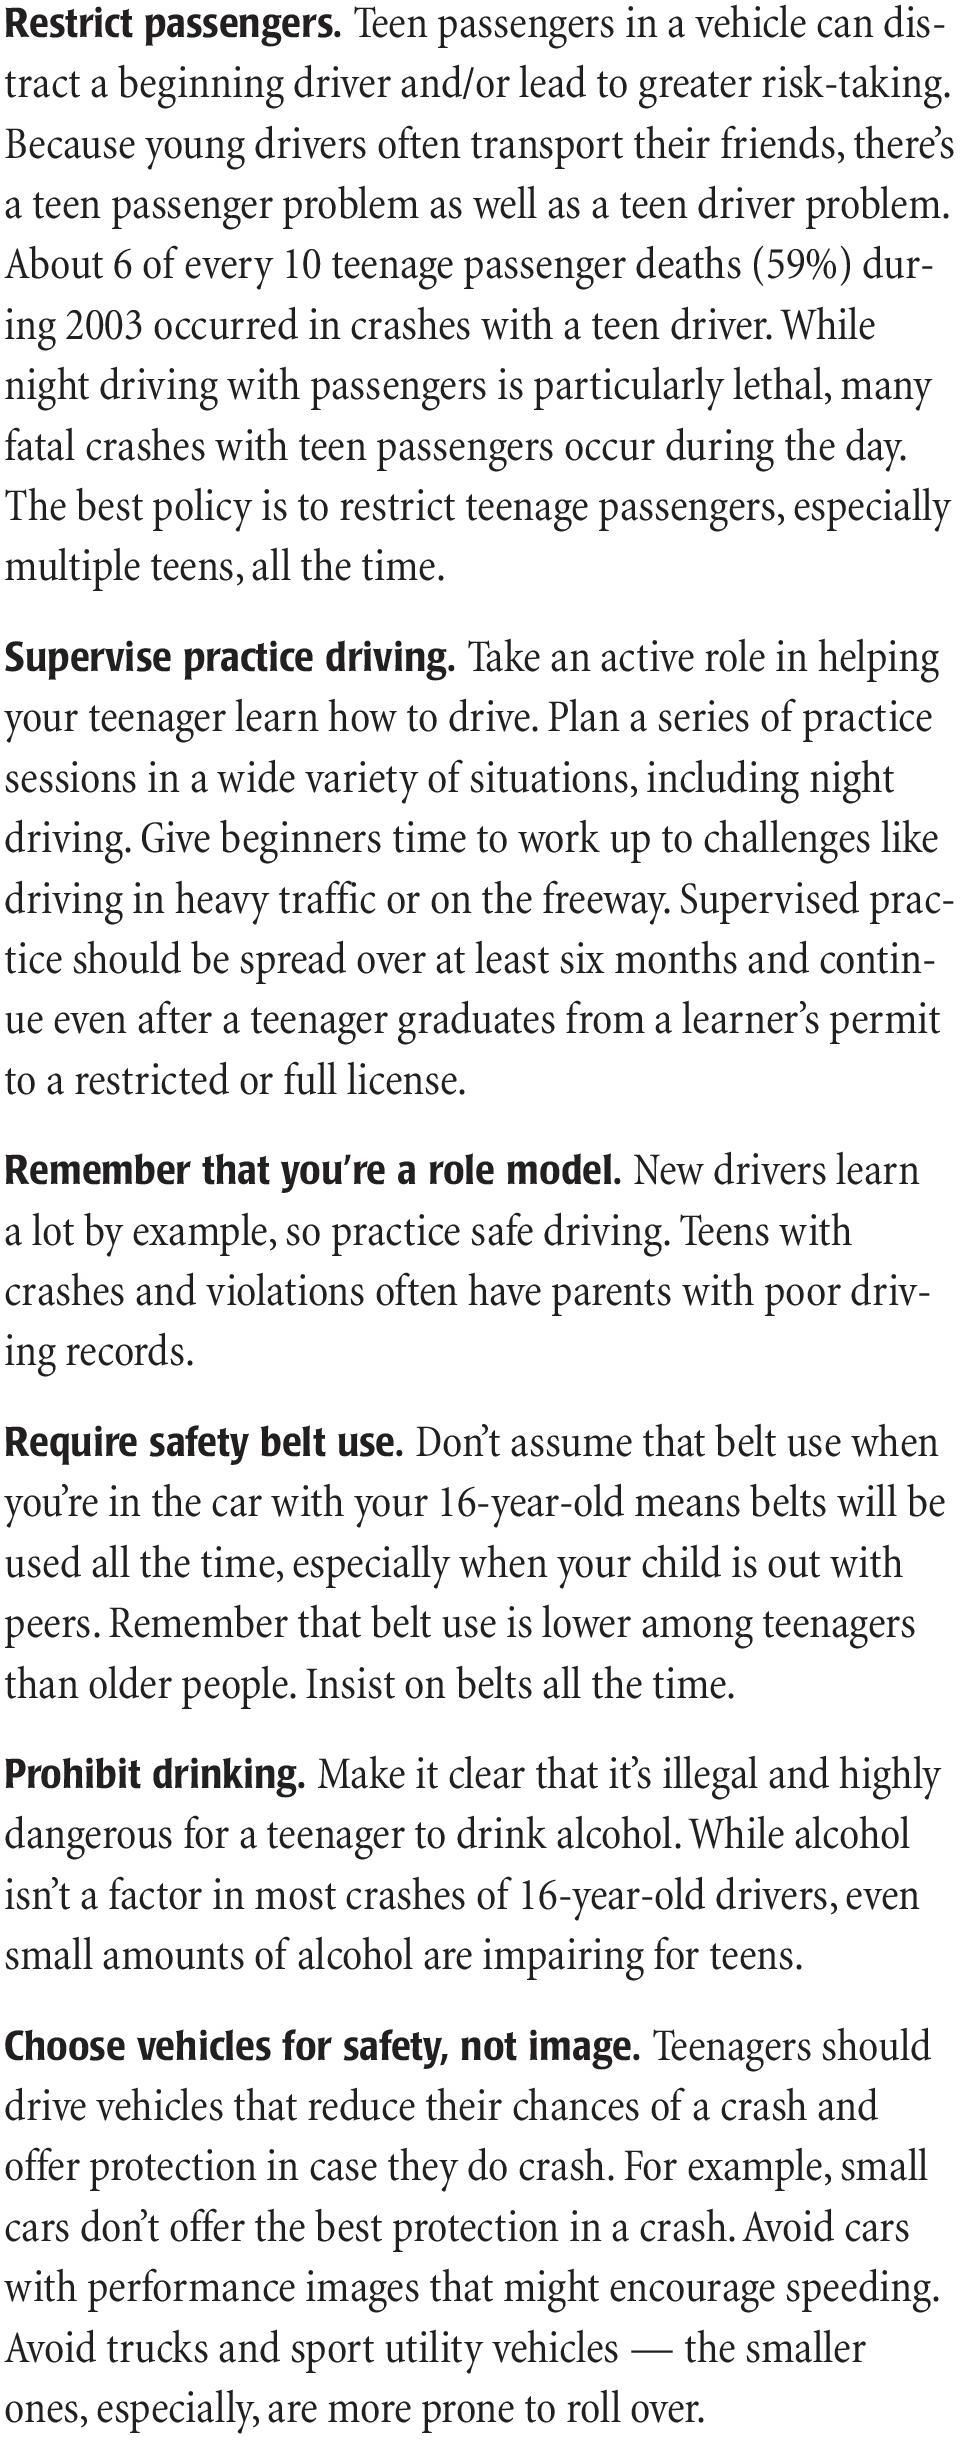 About 6 of every 10 teenage passenger deaths (59%) during 2003 occurred in crashes with a teen driver.